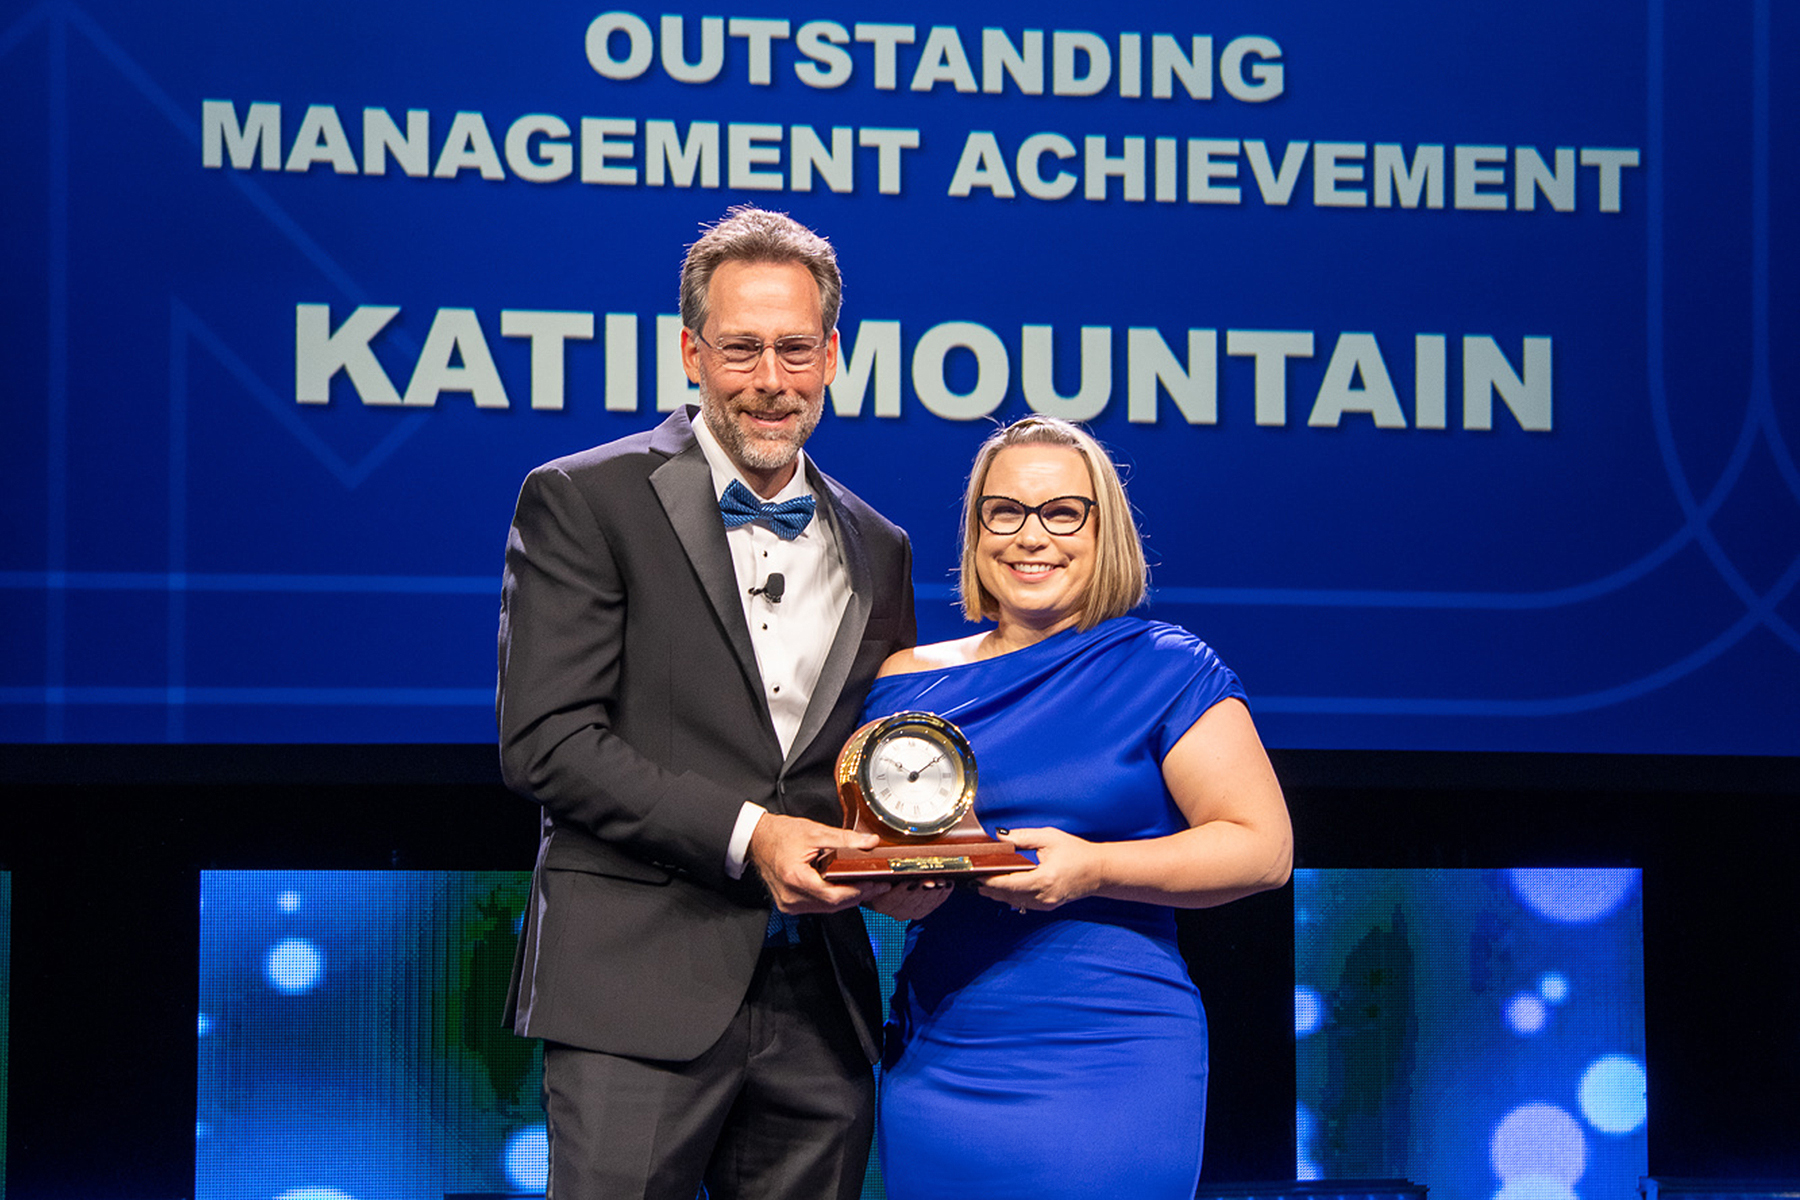 Landstar President and CEO Frank Lonegro (left) presents Vice President of Business Development Katie Mountain (right) with the Landstar Outstanding Management Achievement Award